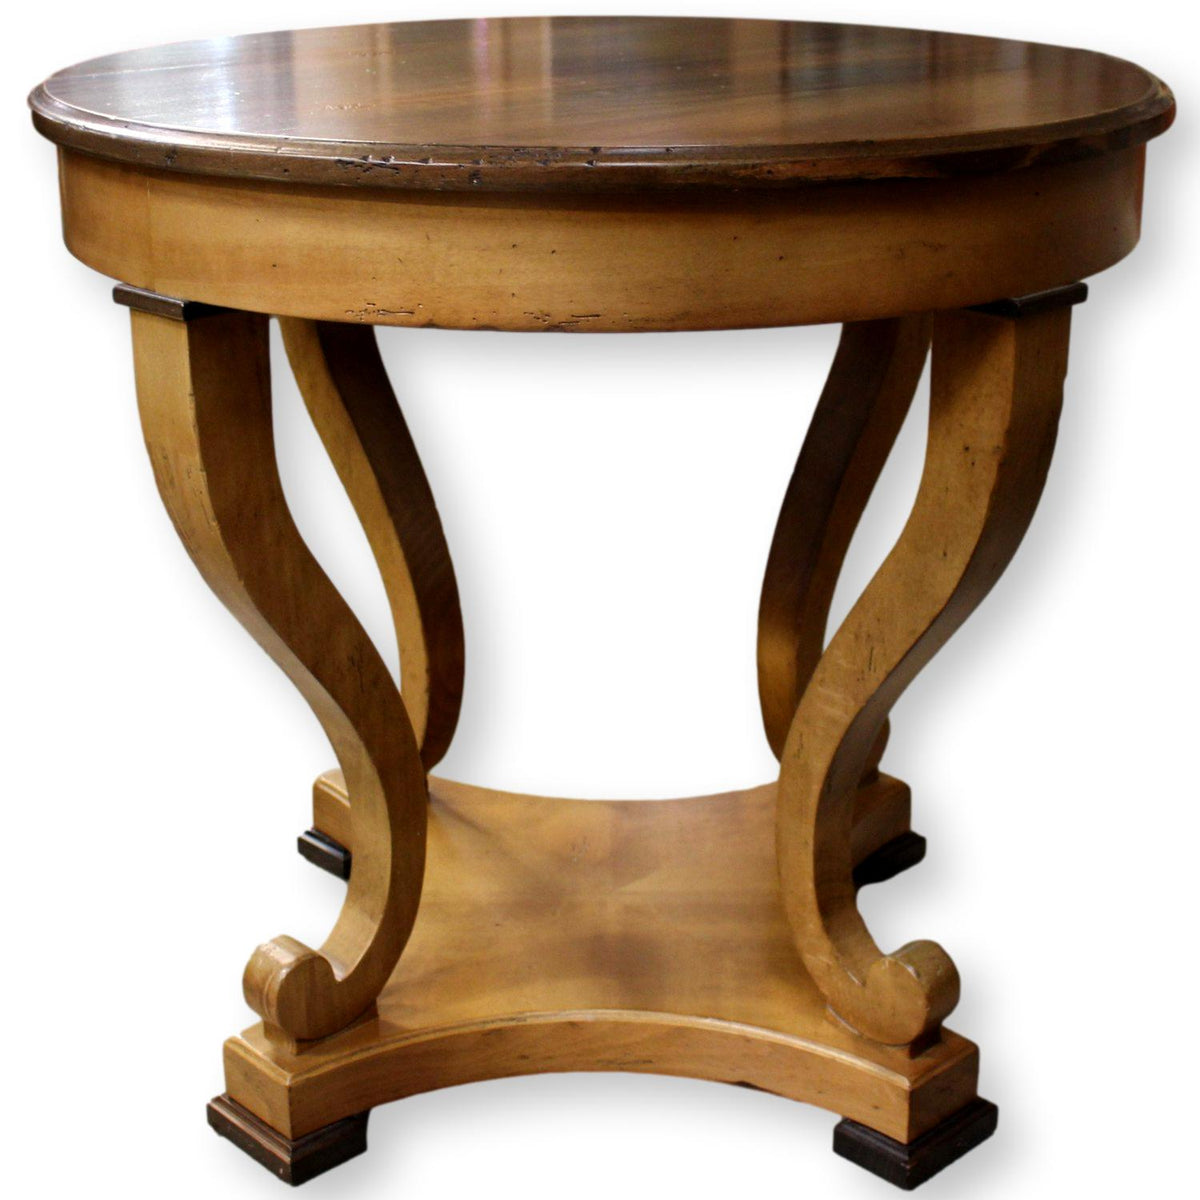 Baker Furniture Milling Road Round Accent Table